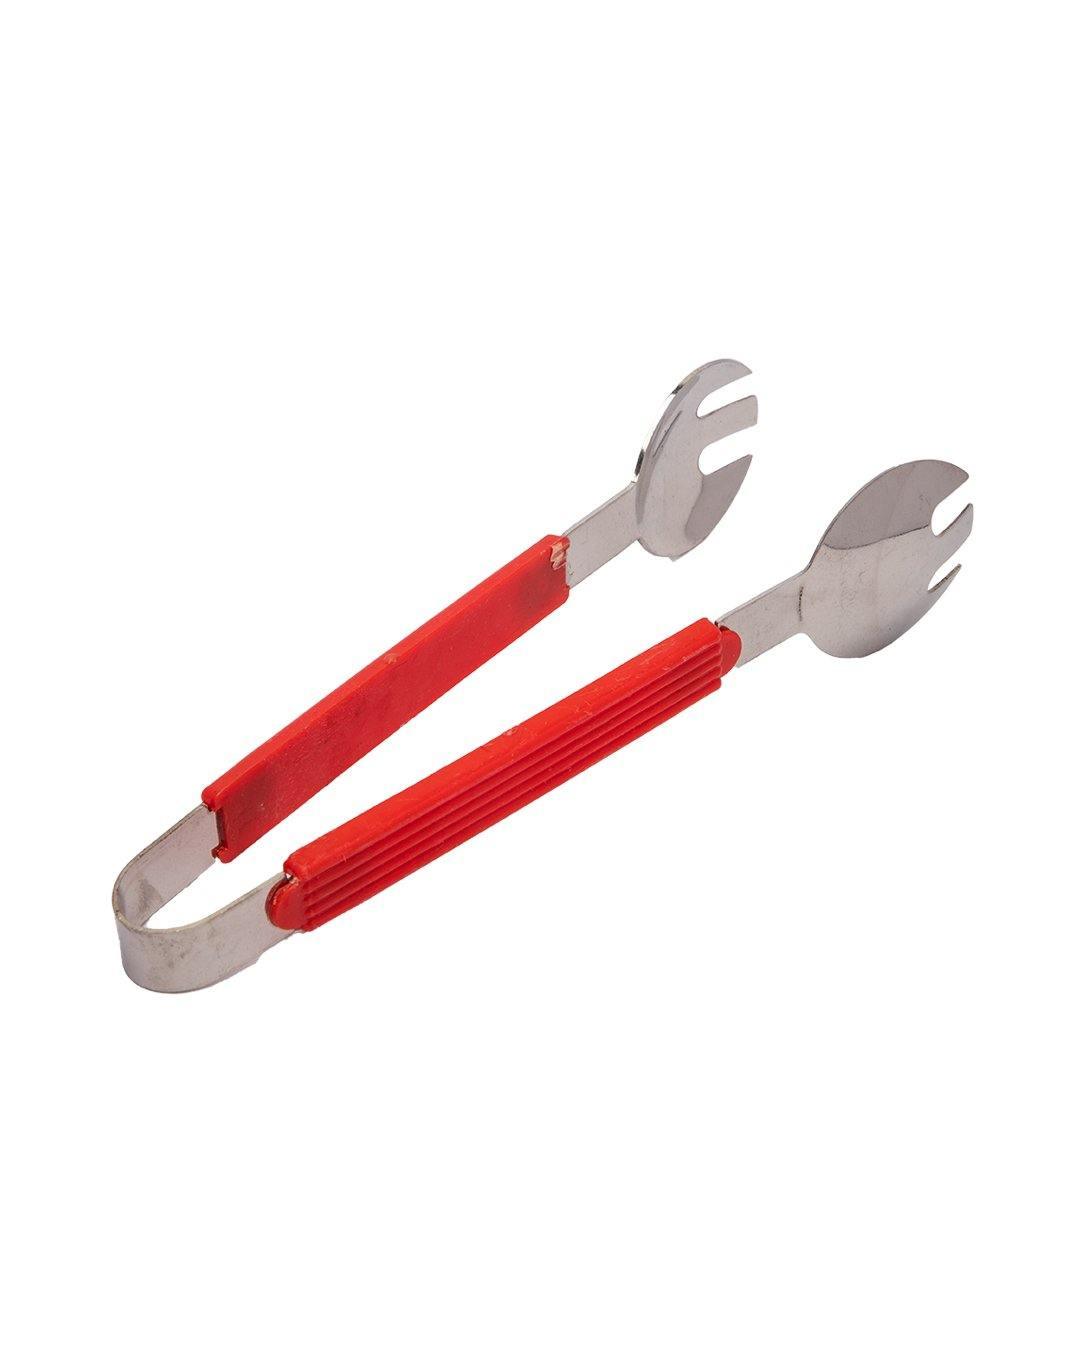 Tongs, Red, Stainless Steel - MARKET 99